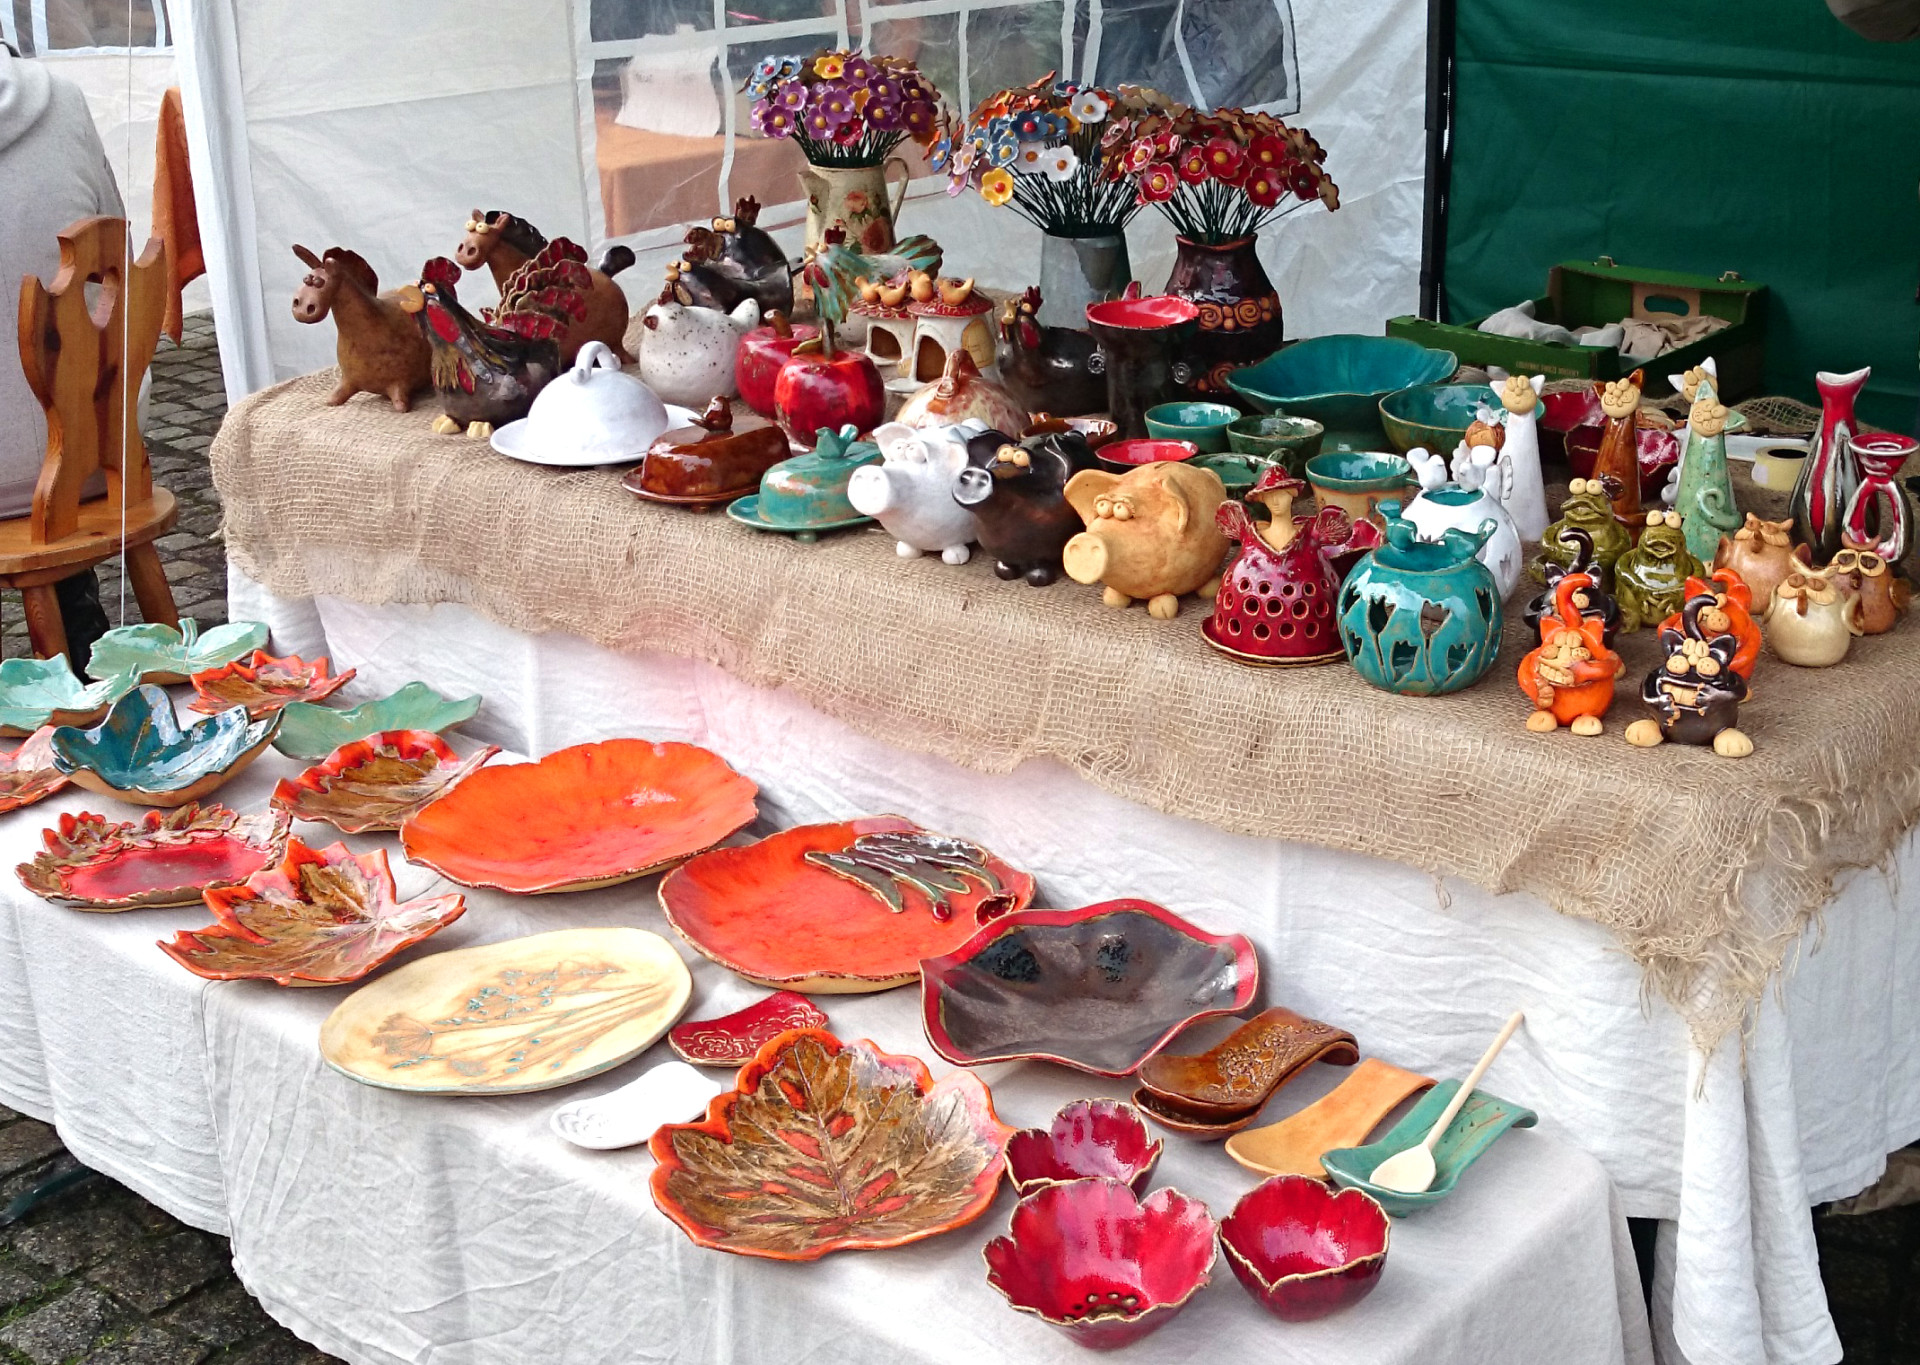 Crystal Days Markets and shows